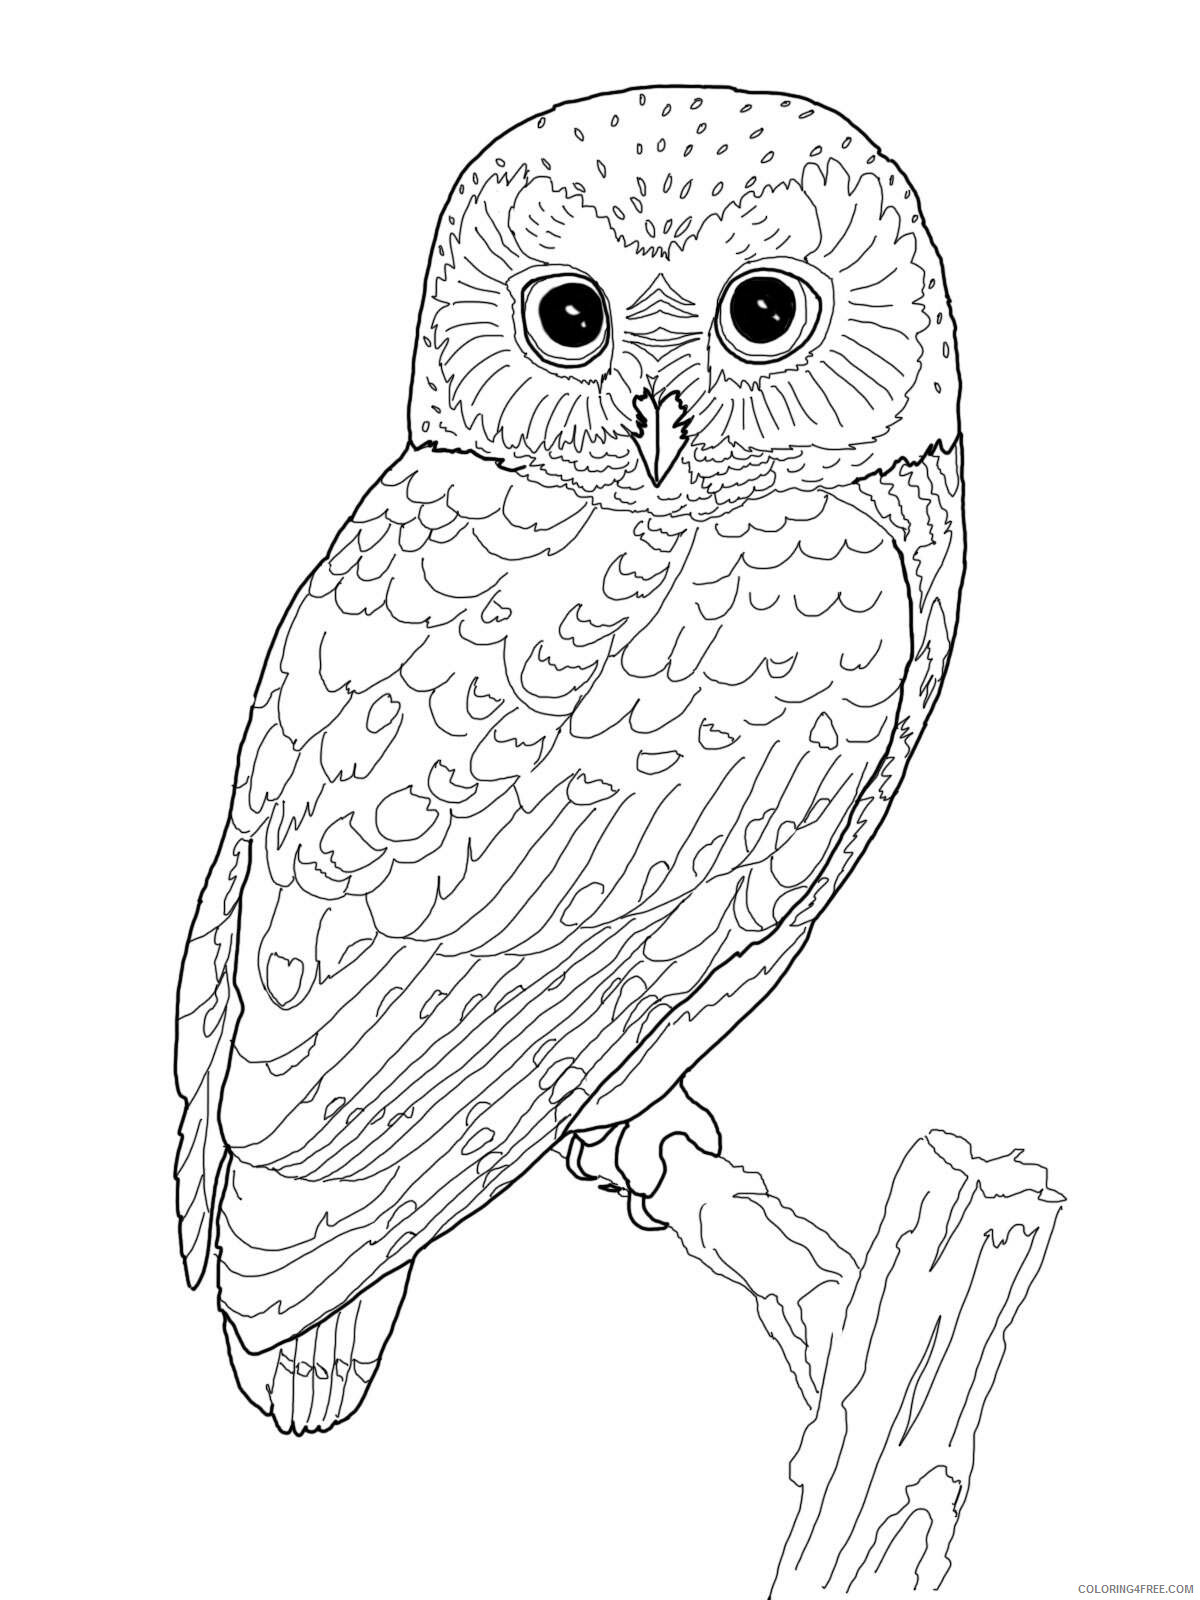 Owl Coloring Pages Animal Printable Sheets Owl 2 2021 3643 Coloring4free